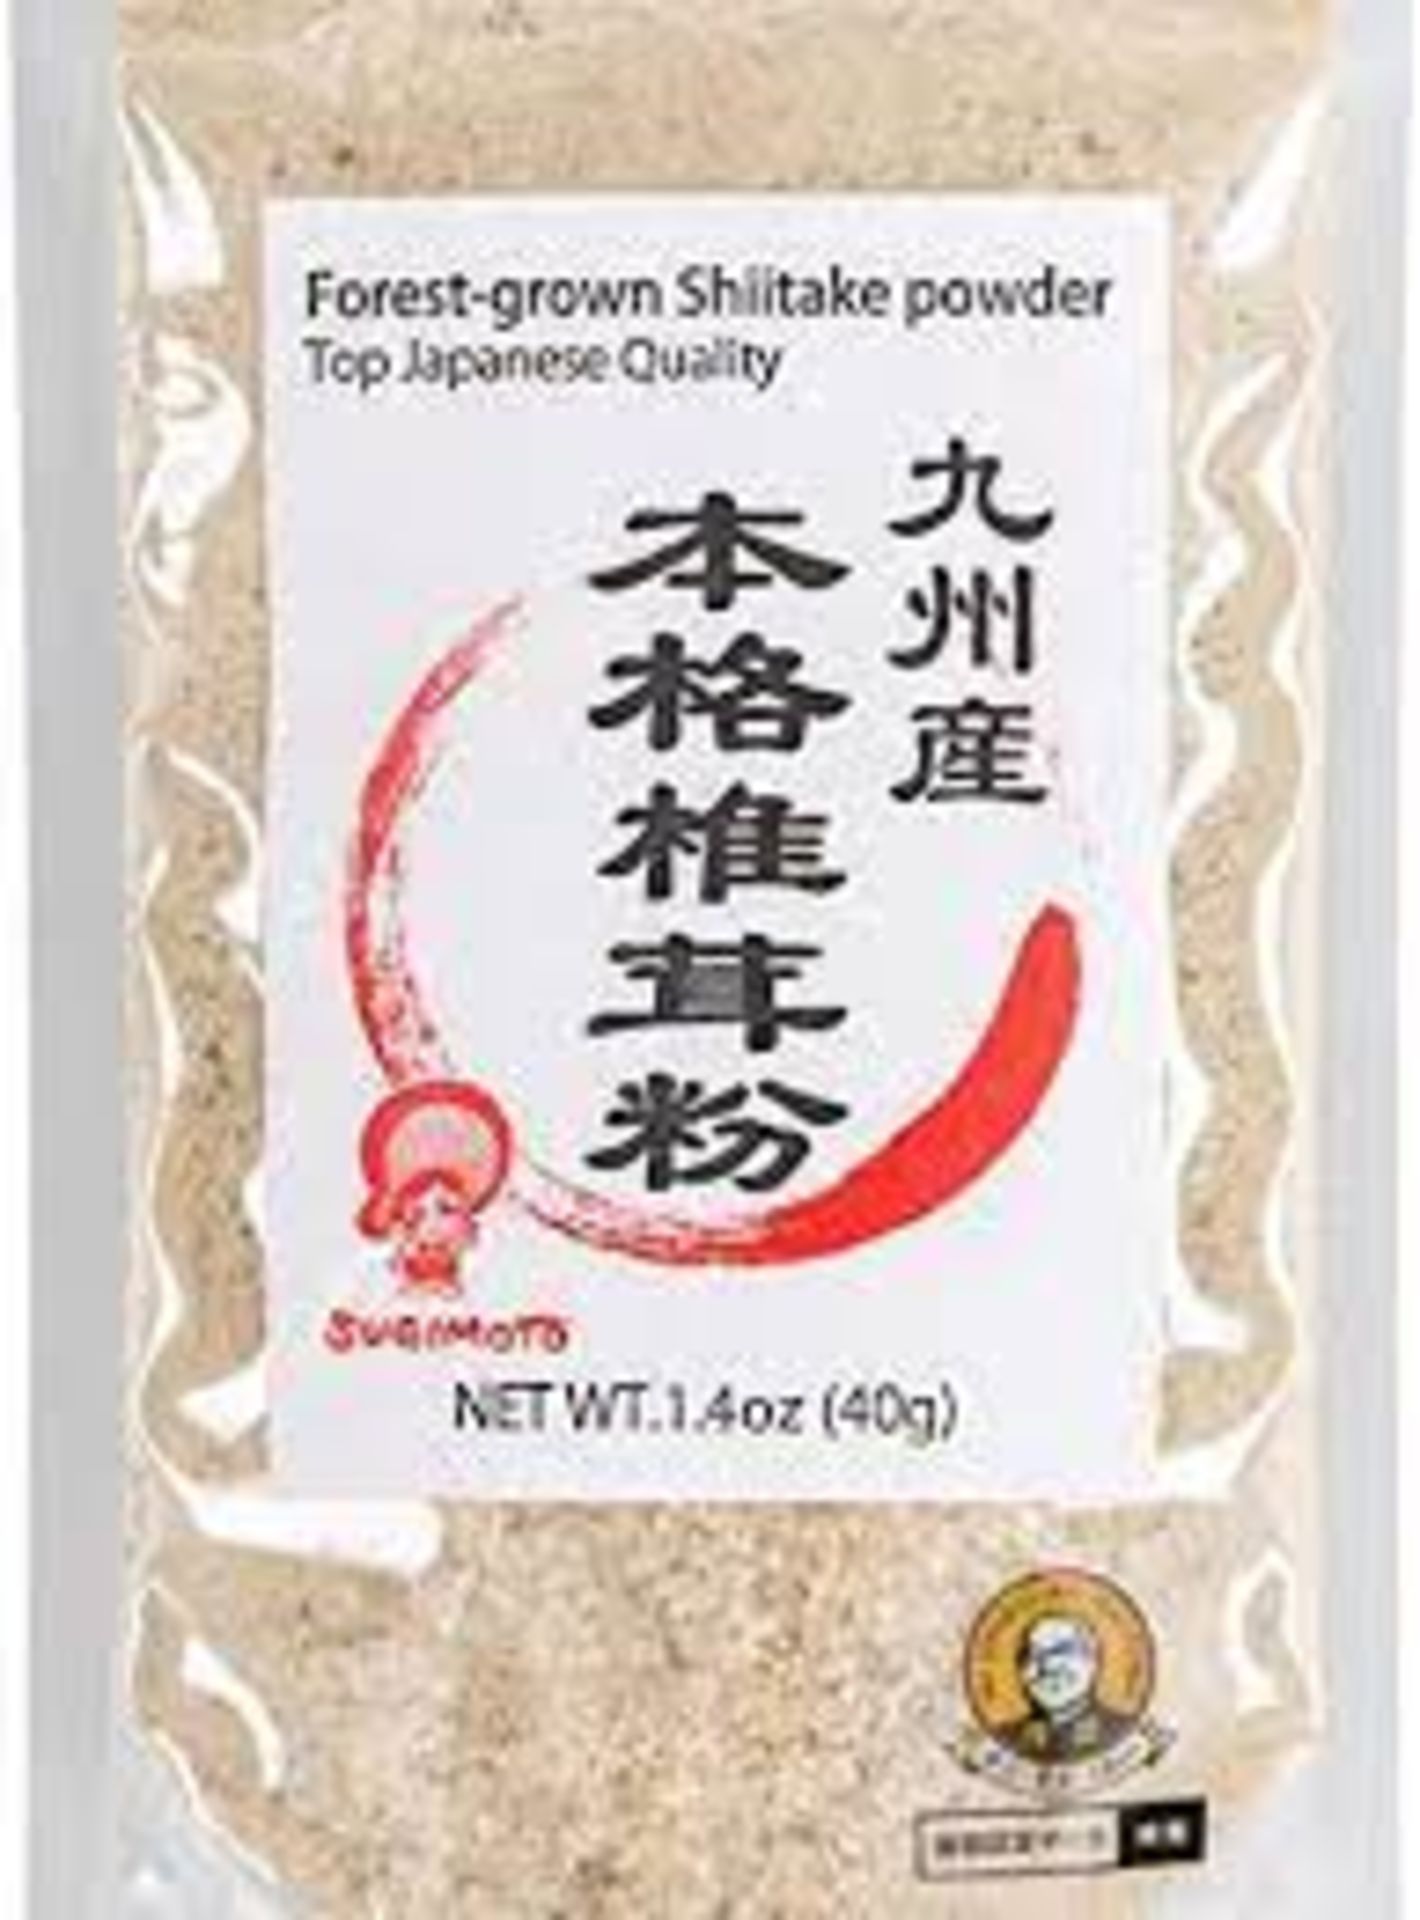 **RRP £1159 (Approx Count 86)(A46) Spw51V5743N 10 X Forest-Grown Japanese Shiitake Powder 40G,